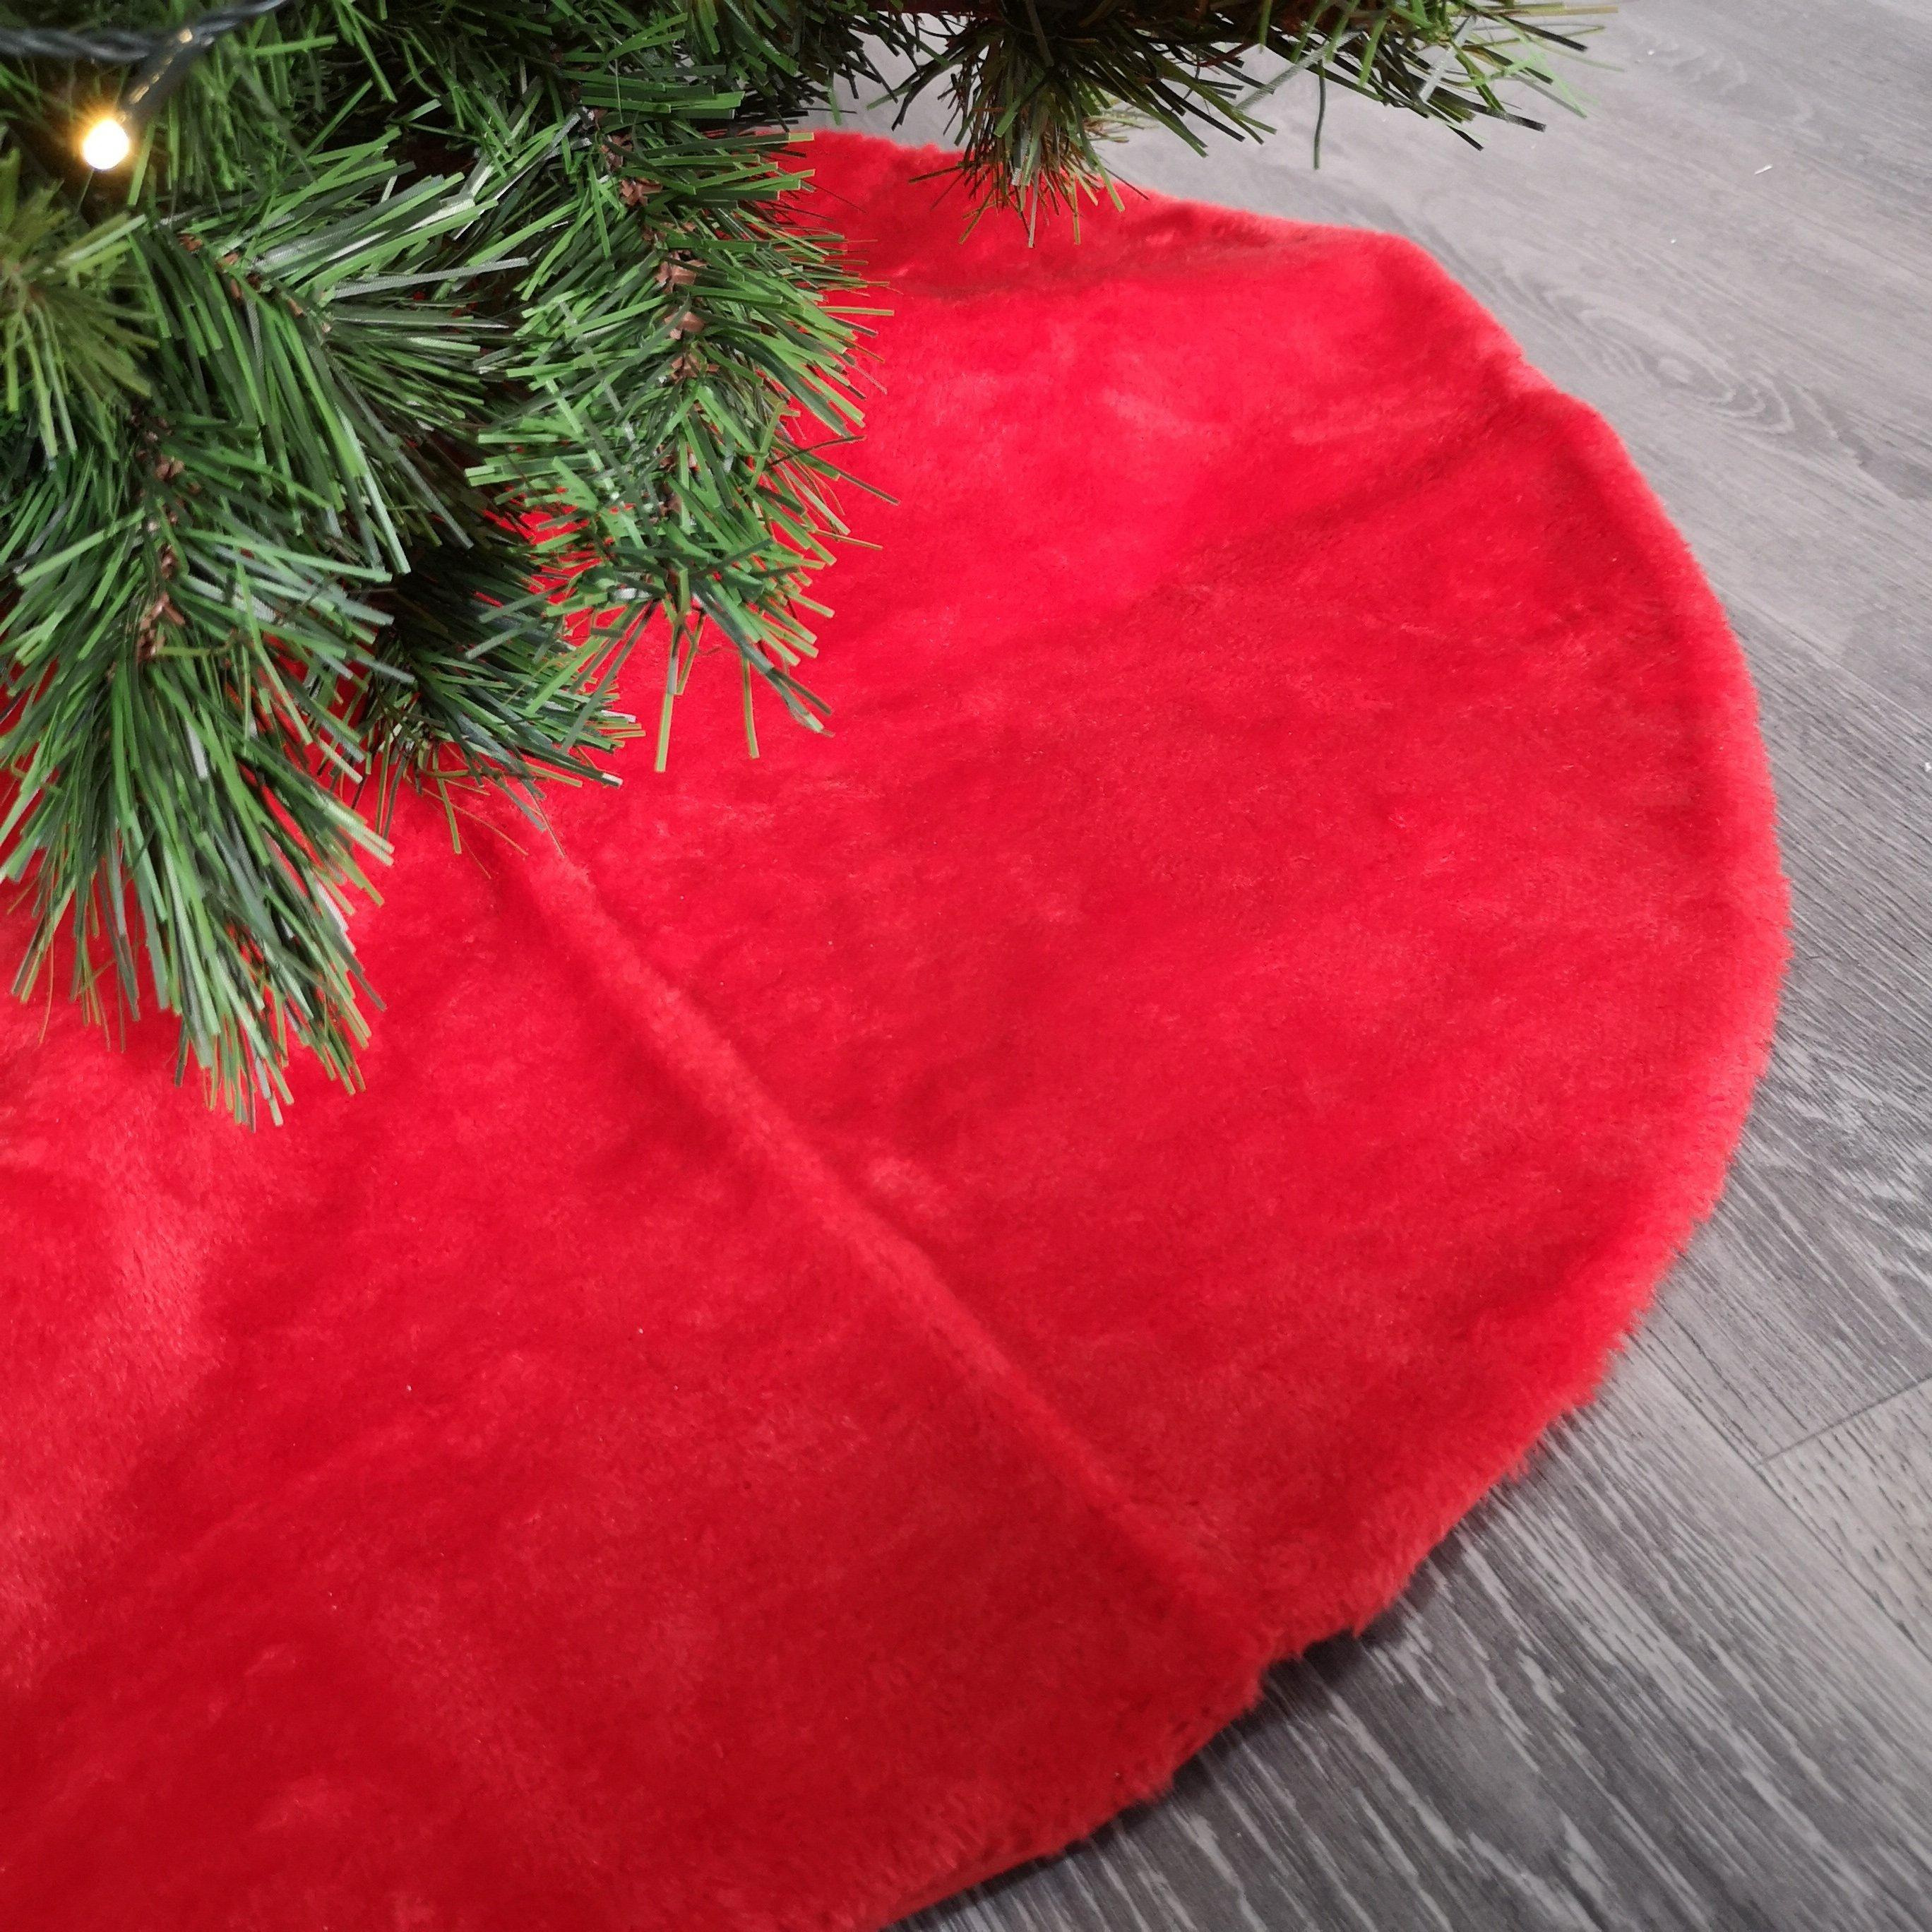 90cm Red Fluffy Plush Christmas Tree Skirt with Ribbon Ties - image 1